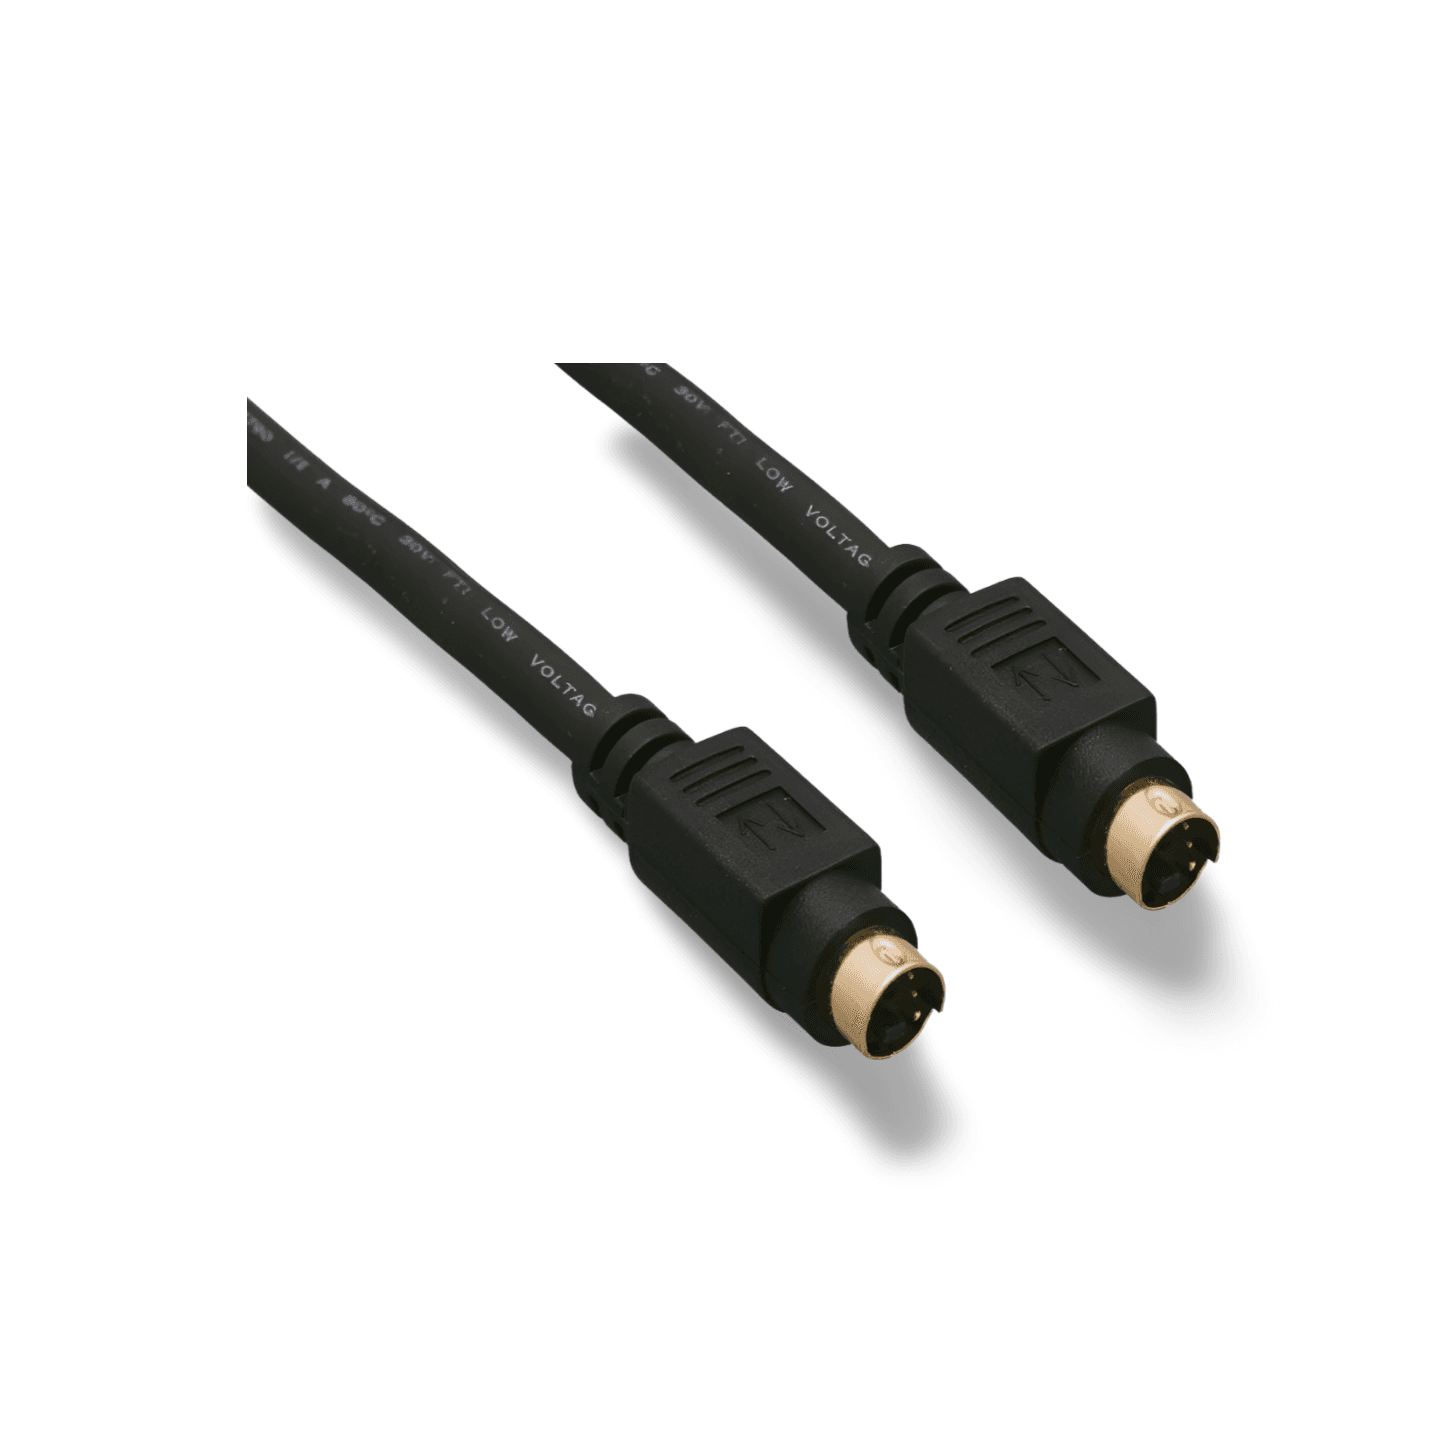 6ft S Video Cable 4 Pin Mini DIN Male to Male black